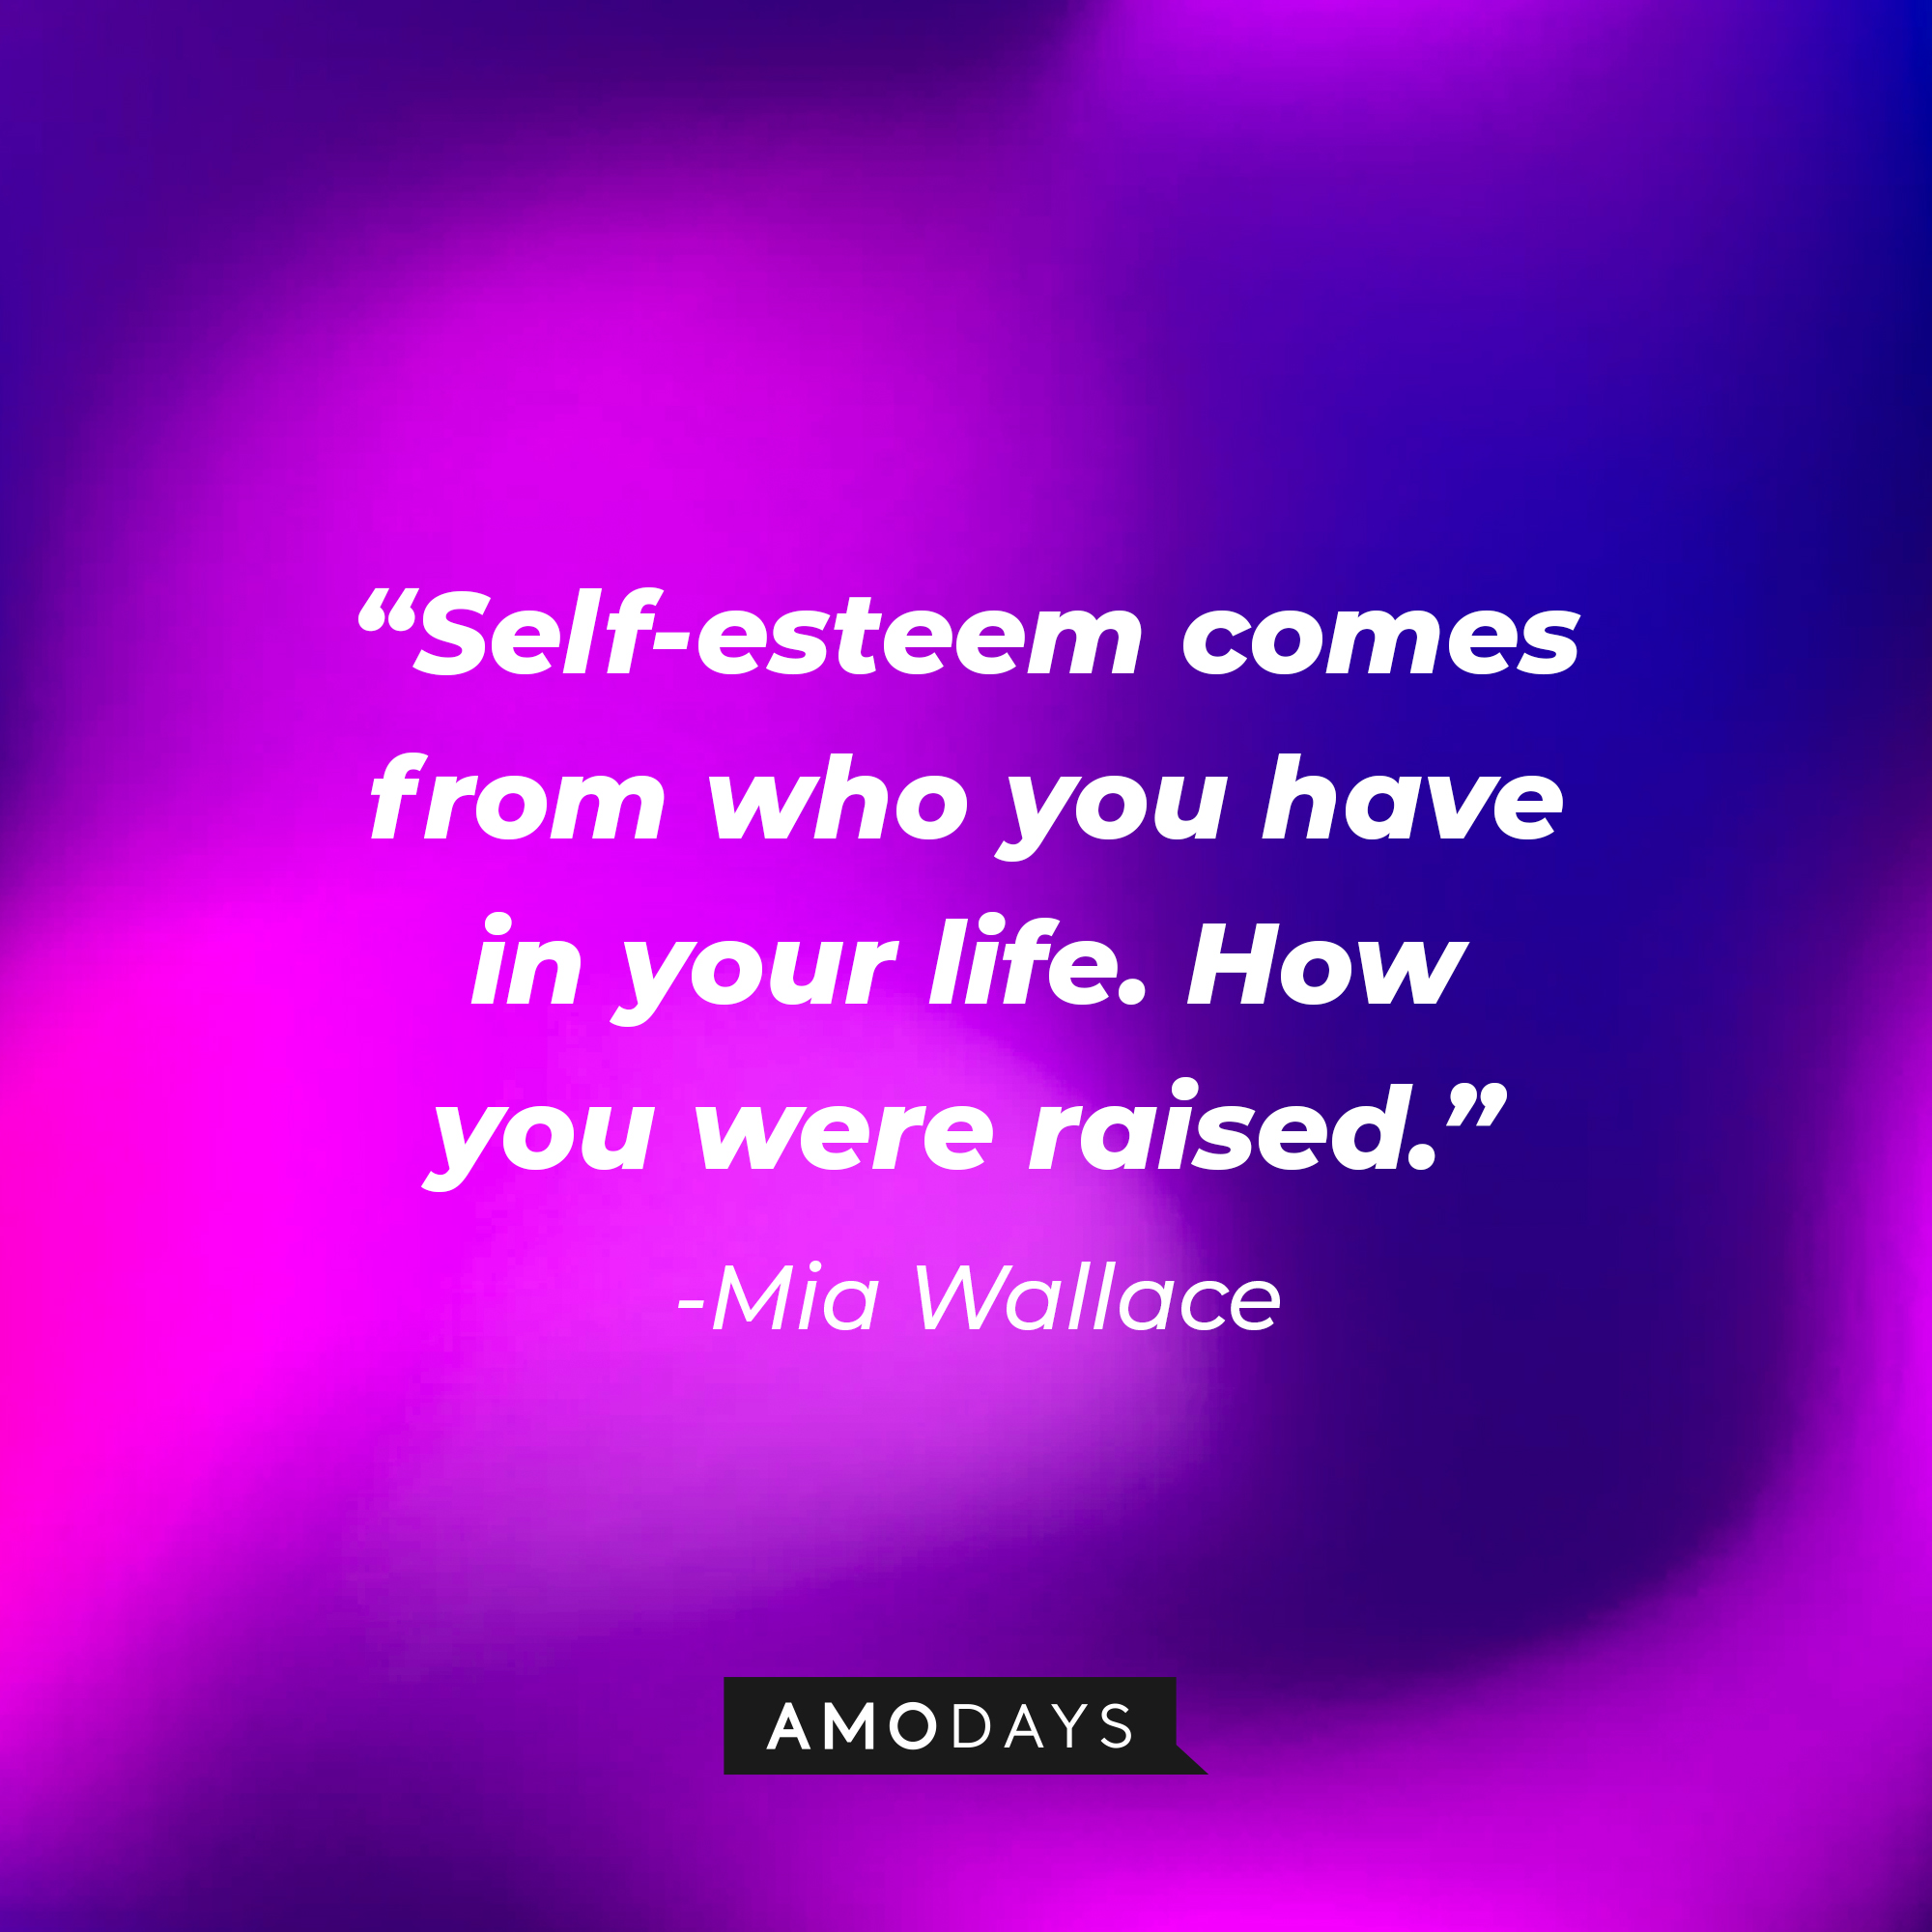 Mia Wallace’s quote: “Self-esteem comes from who you have in your life. How you were raised.” | Source: AmoDays